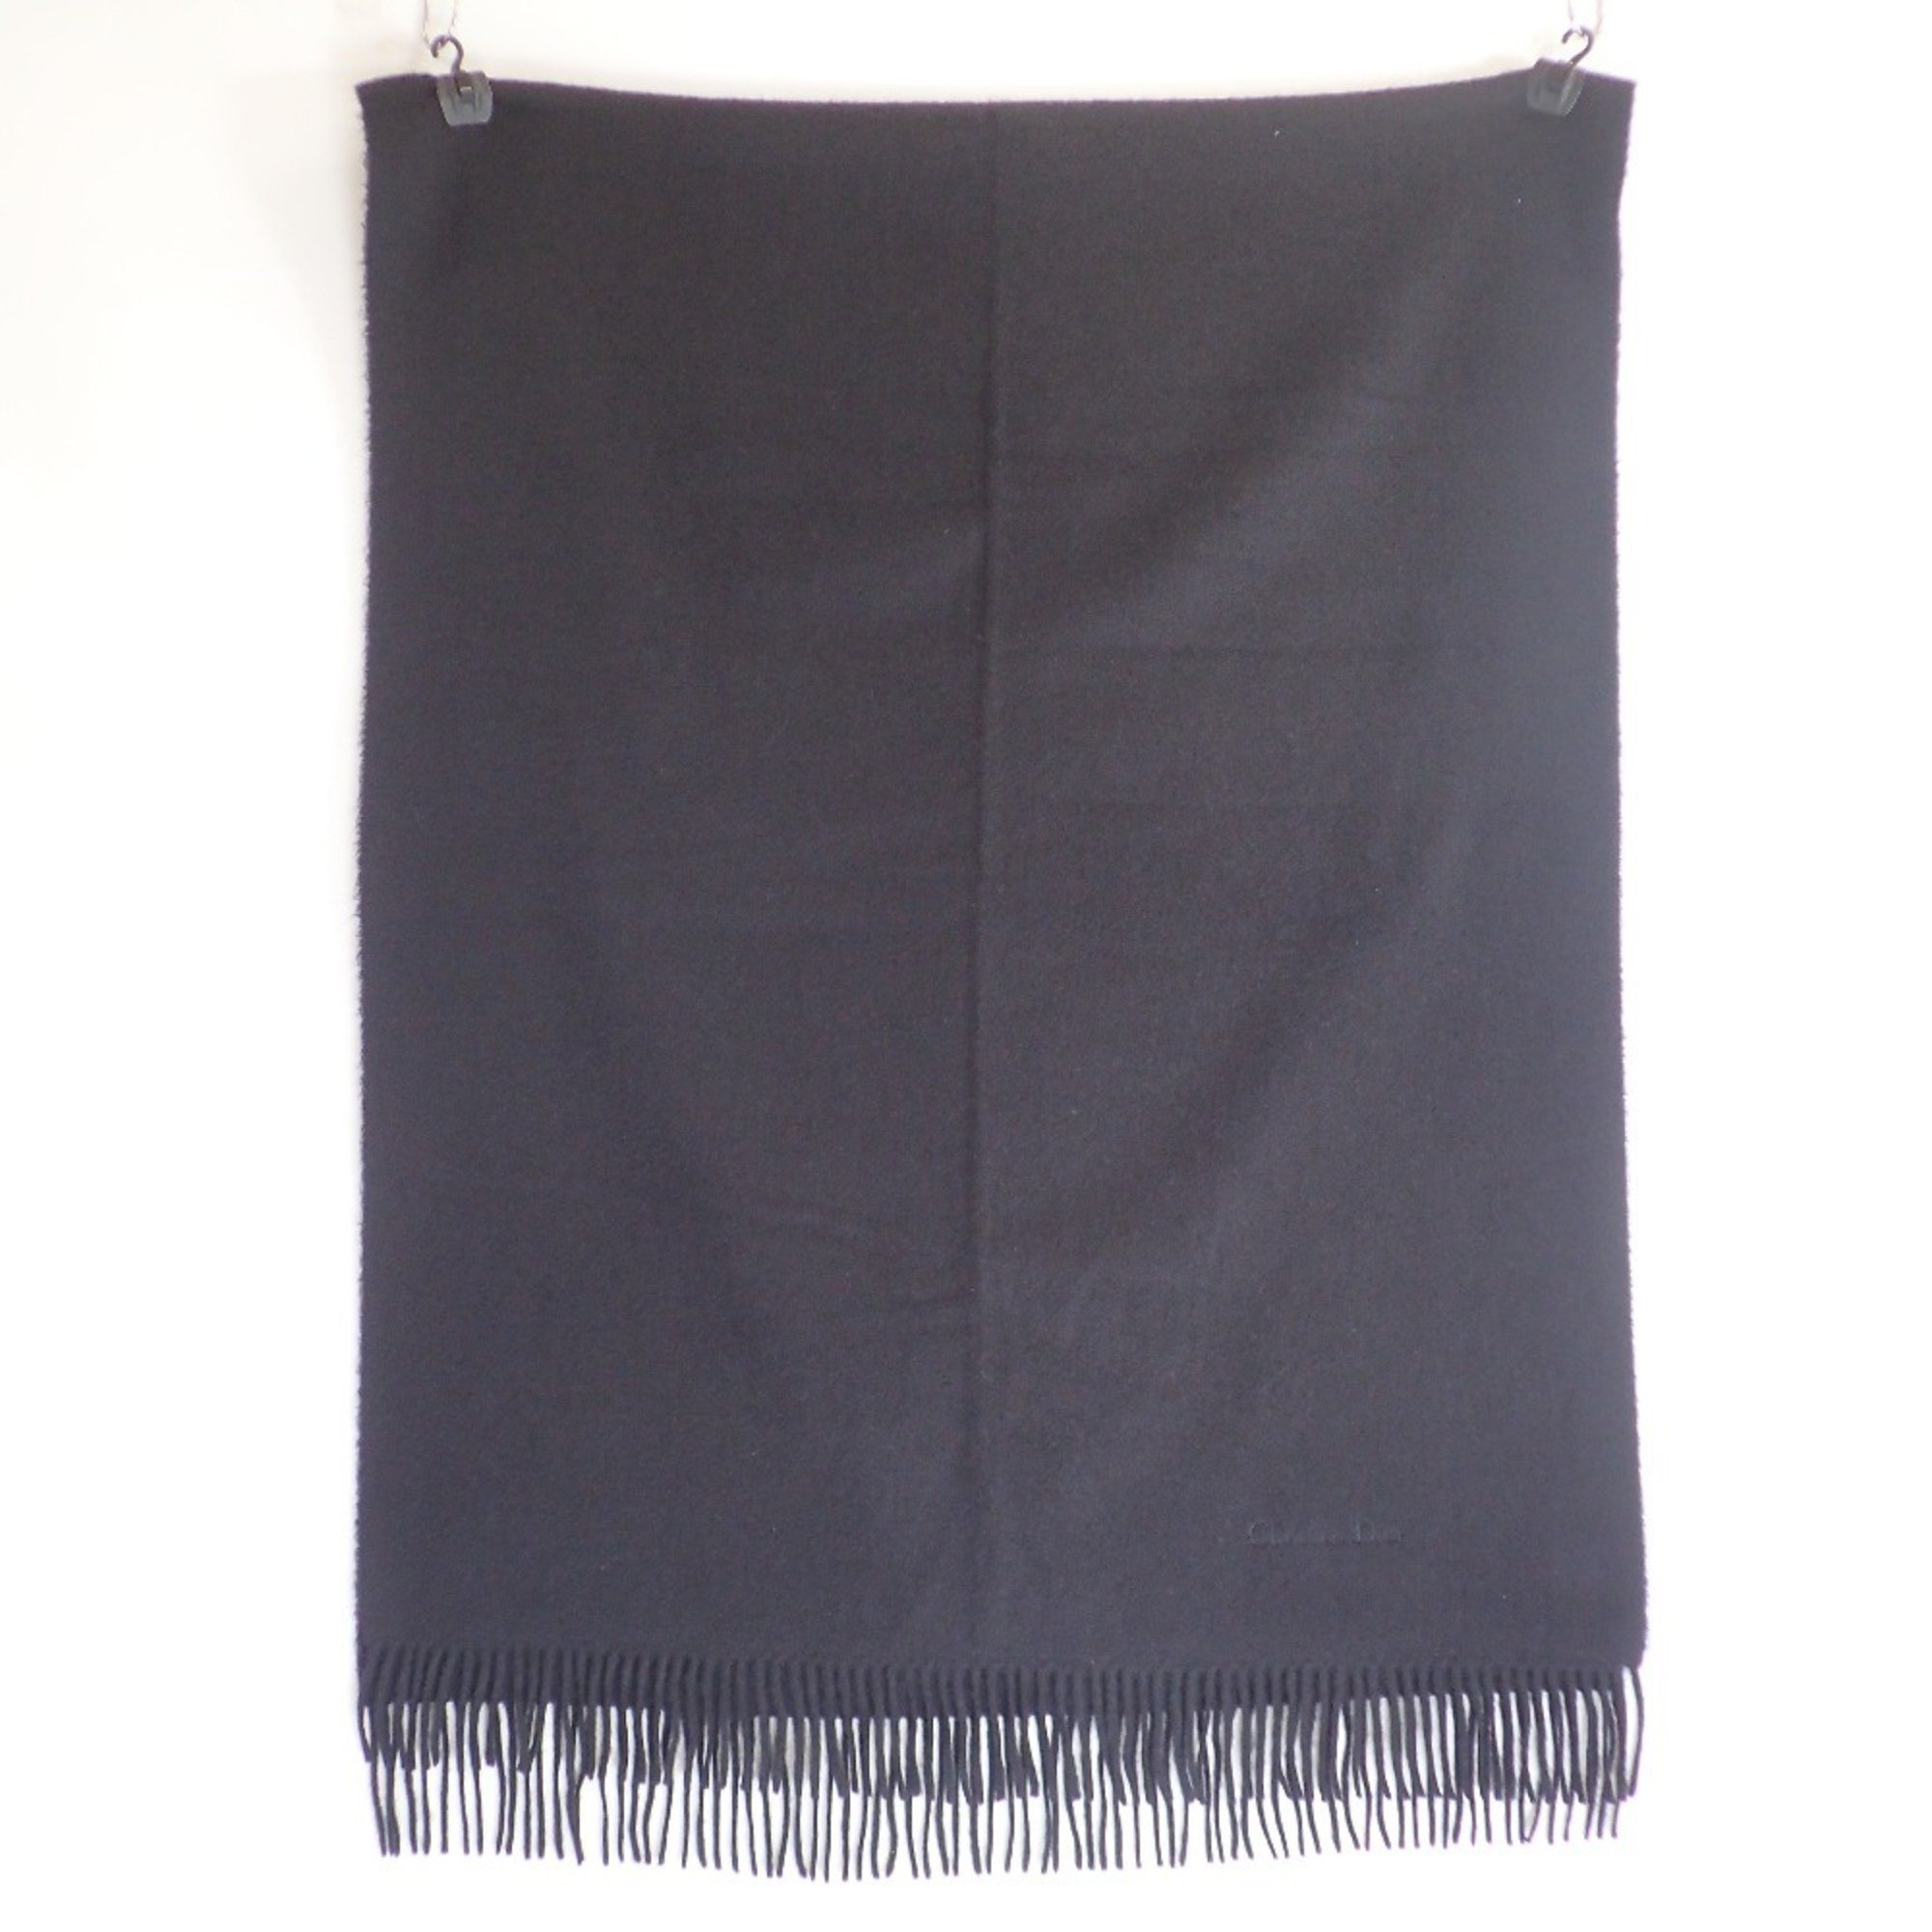 Christian Dior Embroidered Cashmere Scarf Black Women's